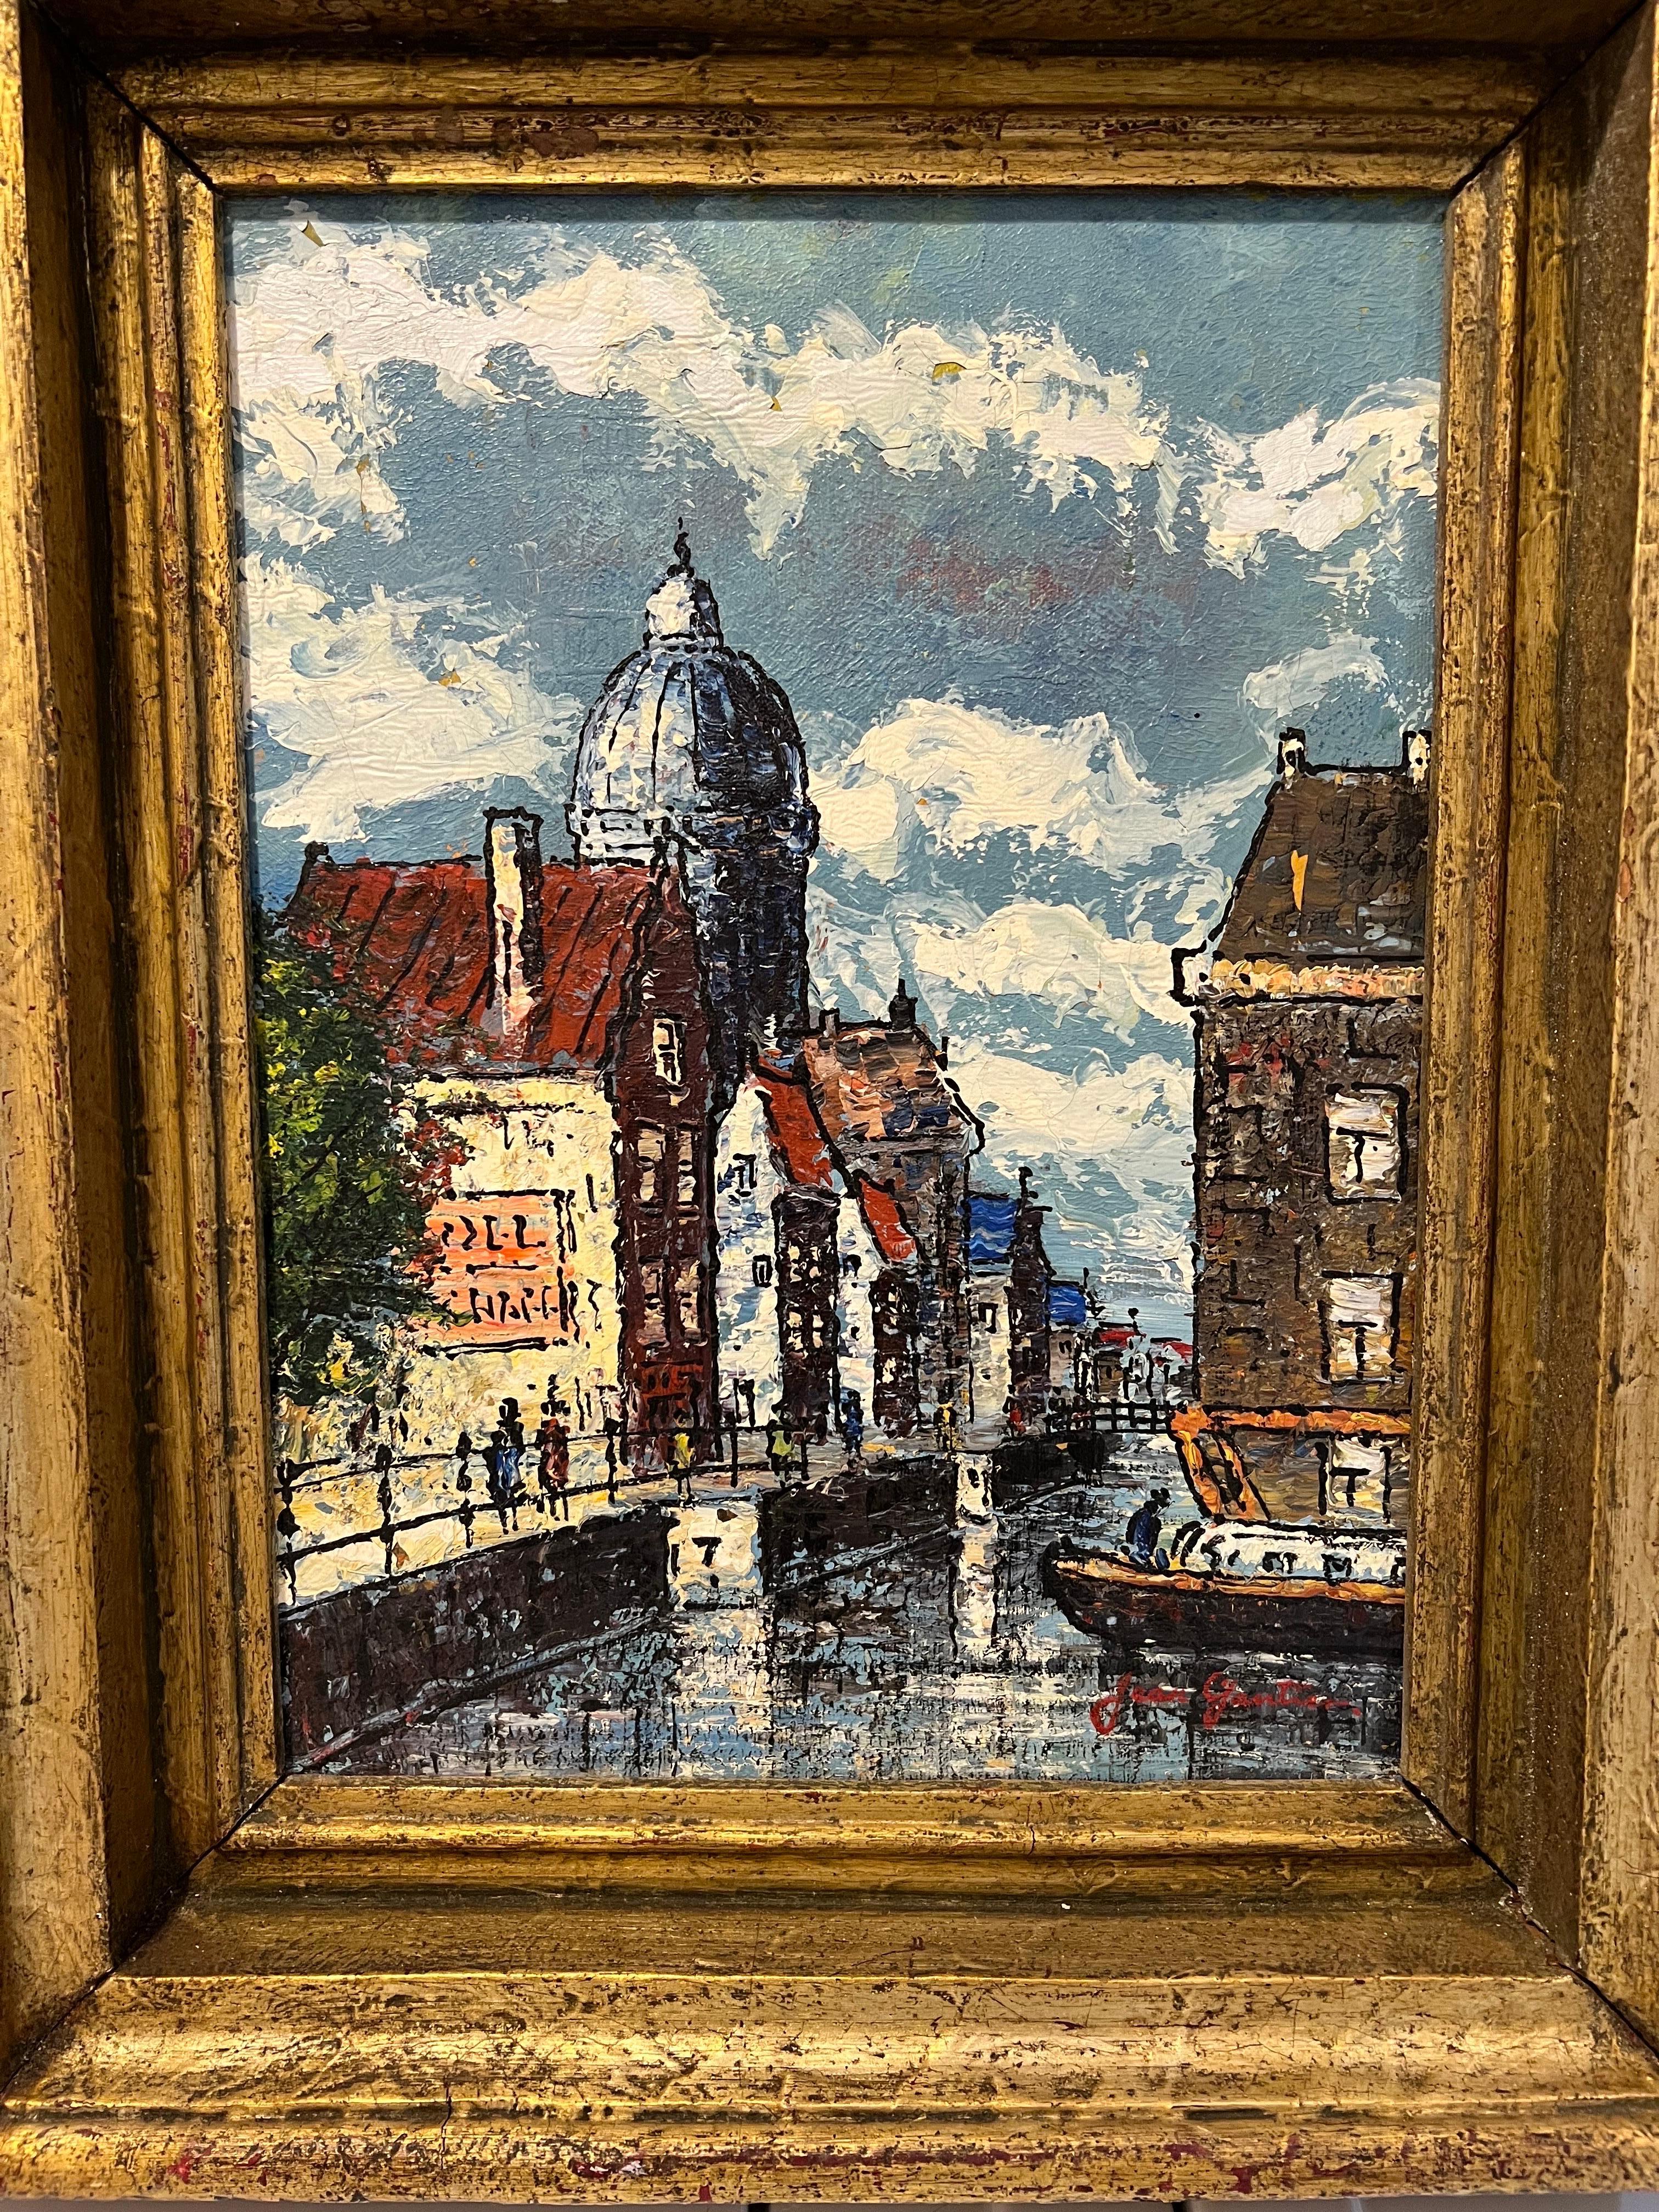 Signed Oil on Canvas by Jean Hubert Gautier (1872-1930). Nice heavy impasto technique of a classic french riverscape. The composition includes heavy clouds with a basilica in the background and riverfront village with pedestrians and a passing boat.